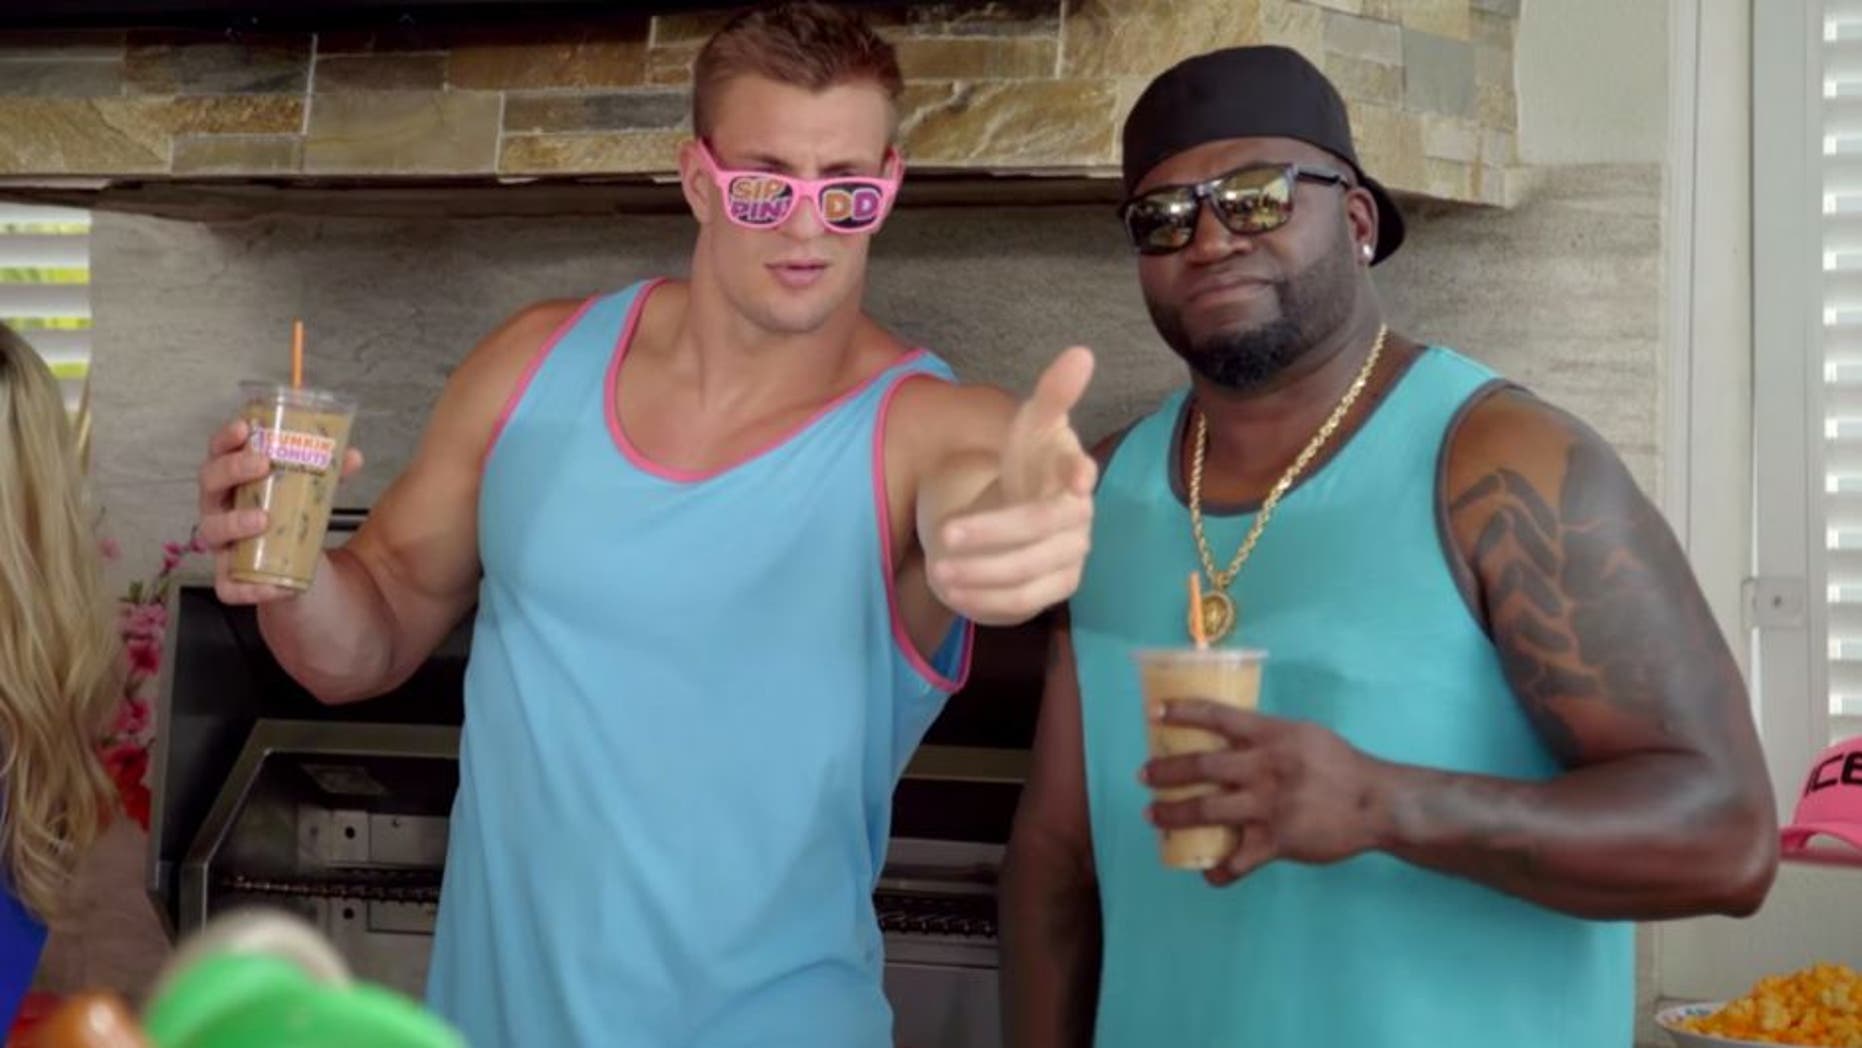 Rob Gronkowski, David Ortiz show off their voices in new commercial